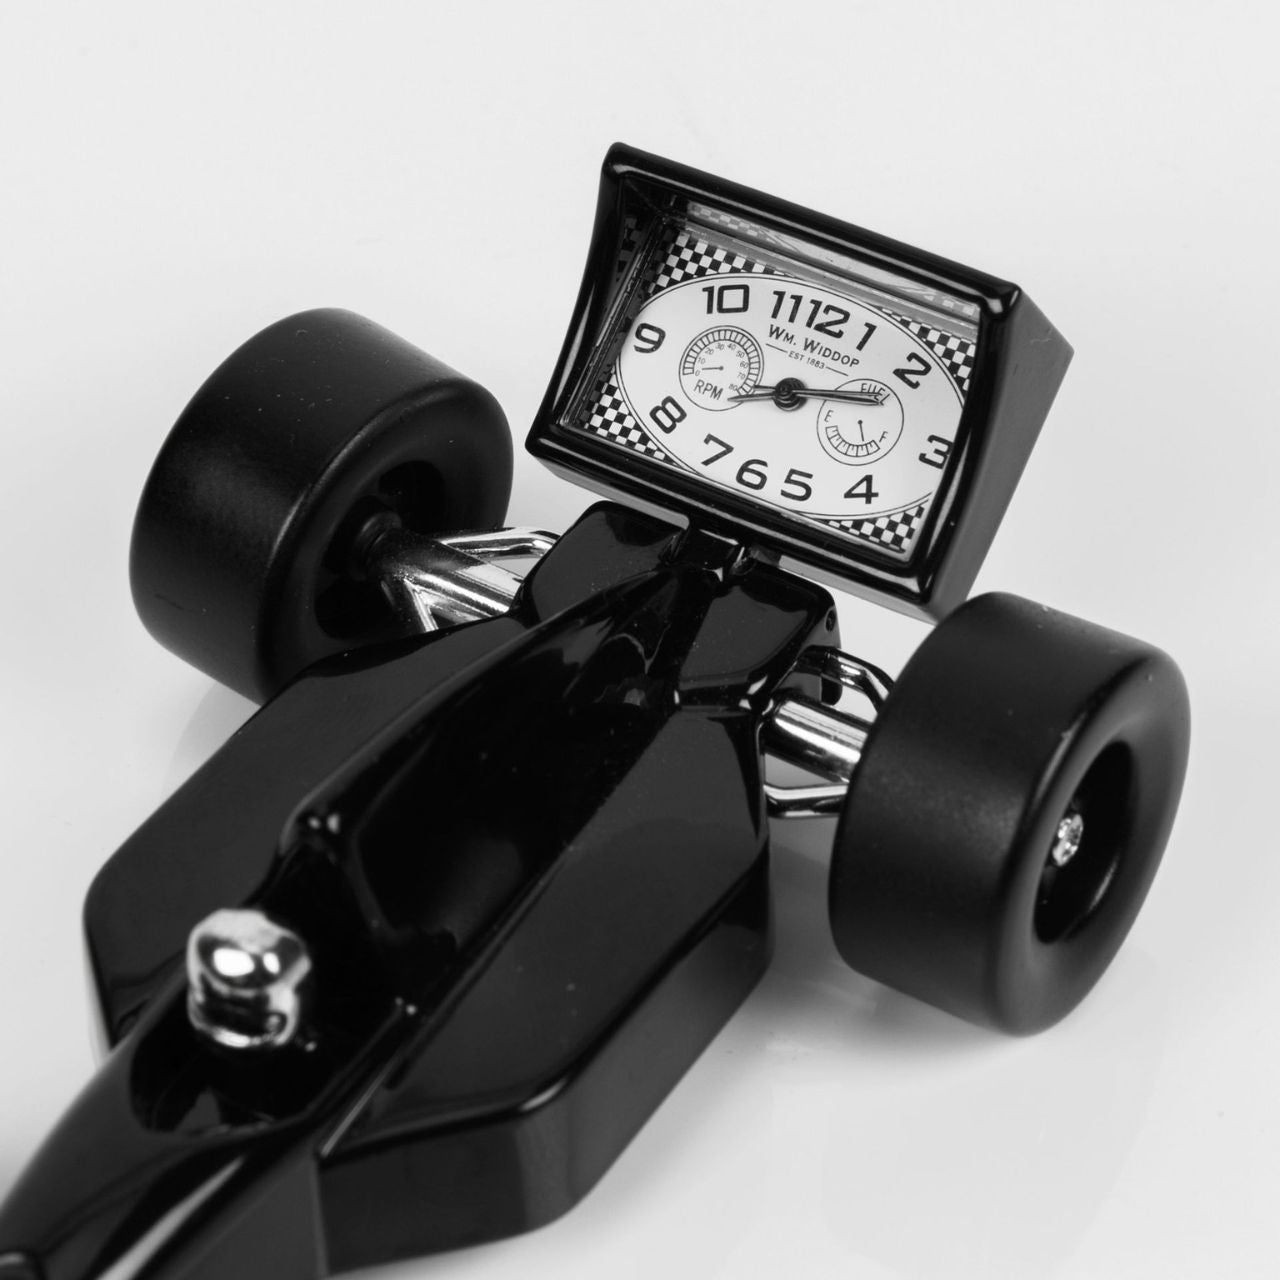 Miniature Clock - Black Racing Car  A delightful, retro inspired die-cast black miniature racing car clock from WILLIAM WIDDOP. With superb attention to detail this makes a wonderful gift for the desk of a friend or loved one with a passion for the motor racing or formula 1. Complete with moving steering wheel and tyres.